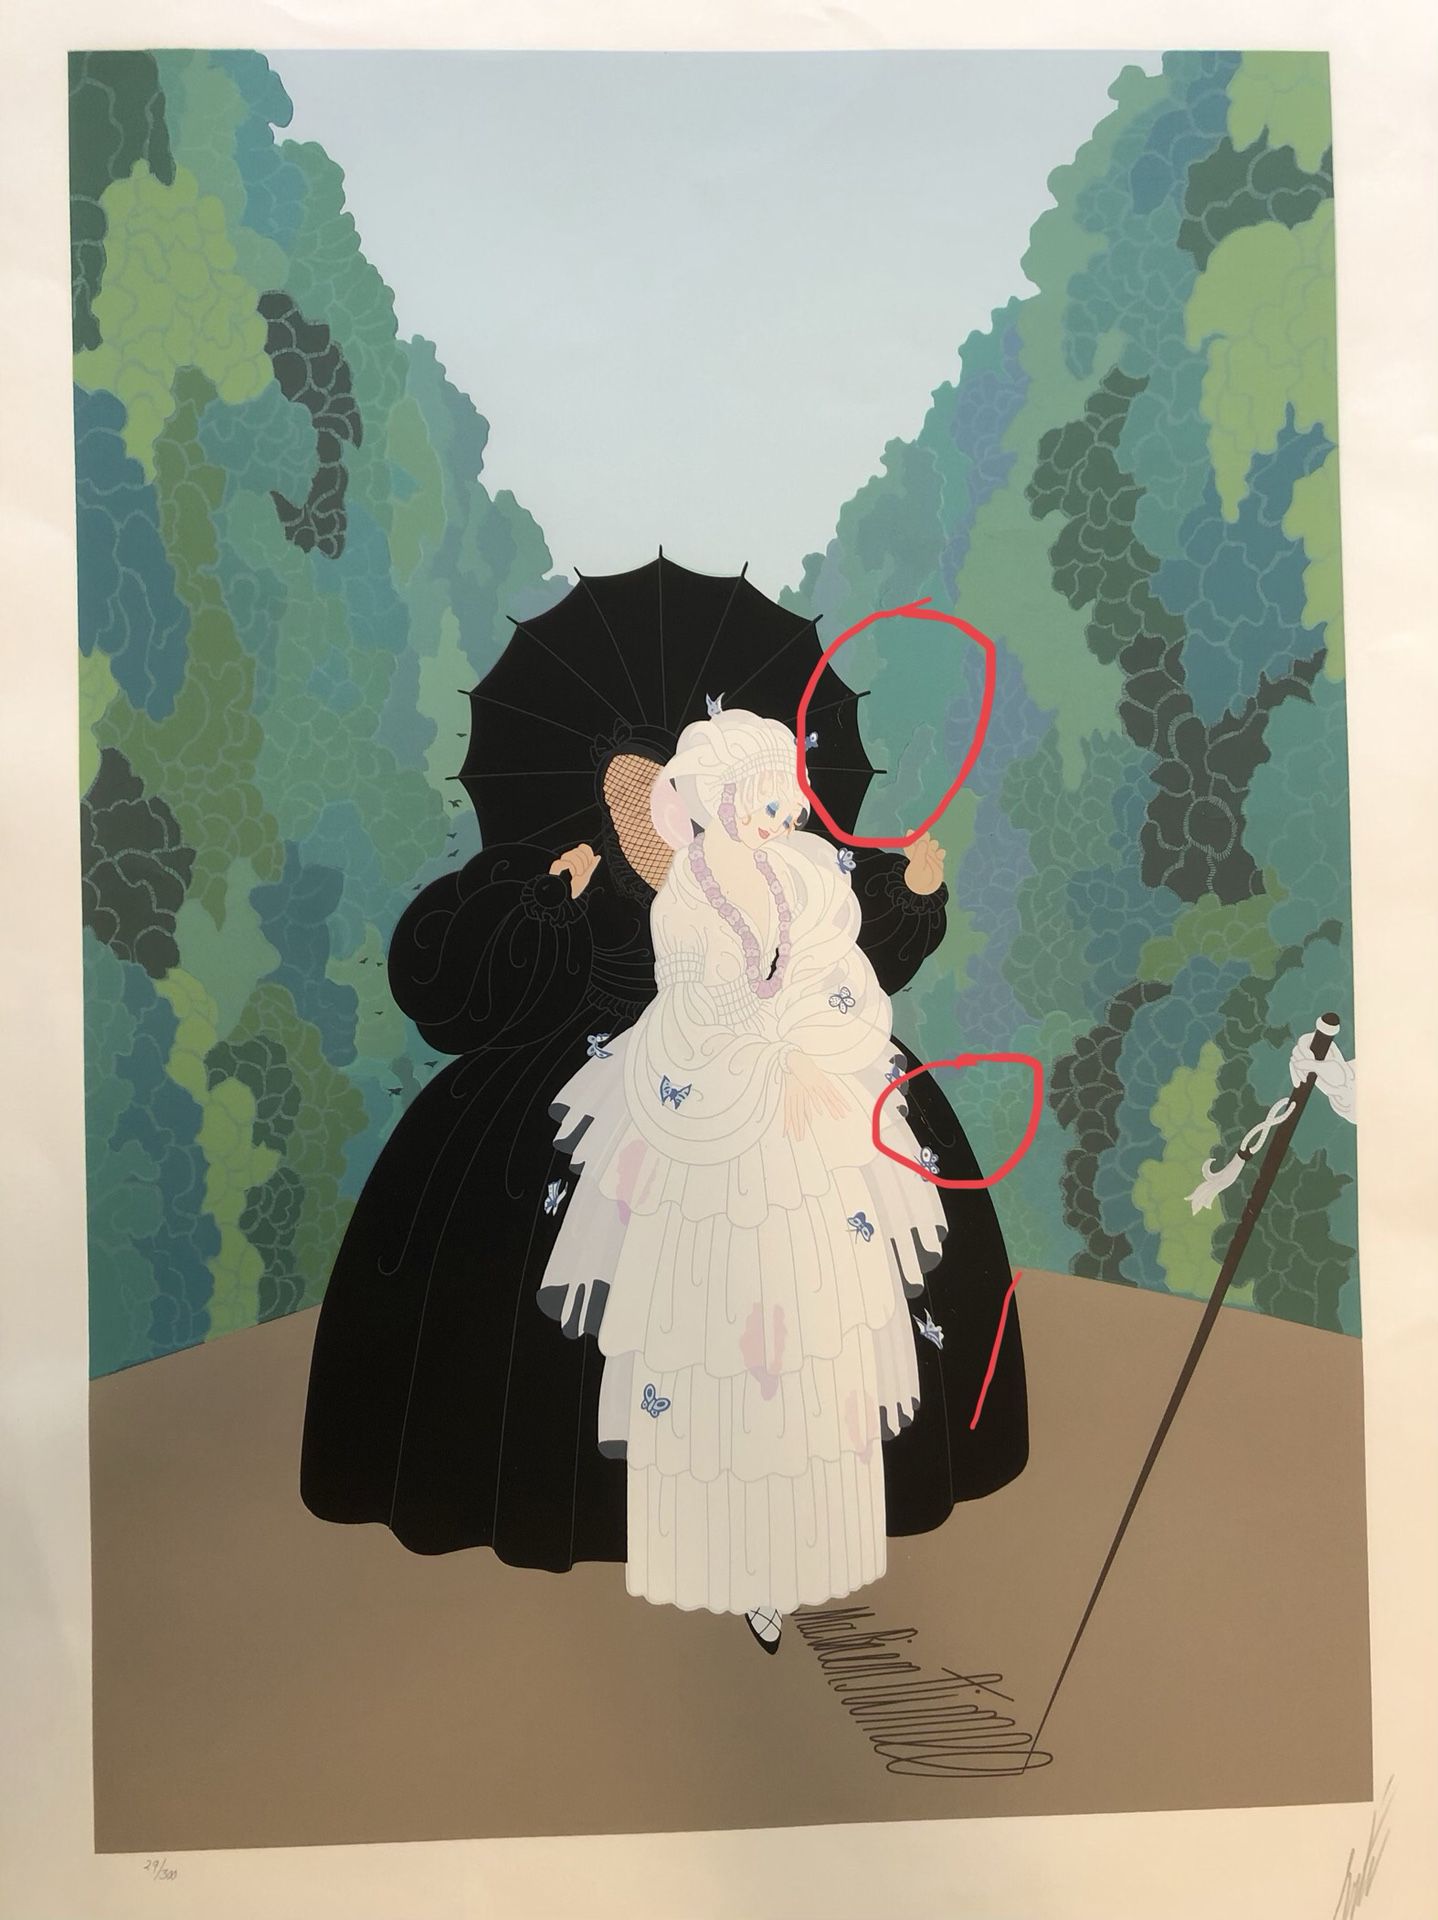 Erte “Debutant” serigraph Signed and numbered/ Discounted due to minor scratch pictures. Otherwise fine condition very displayable